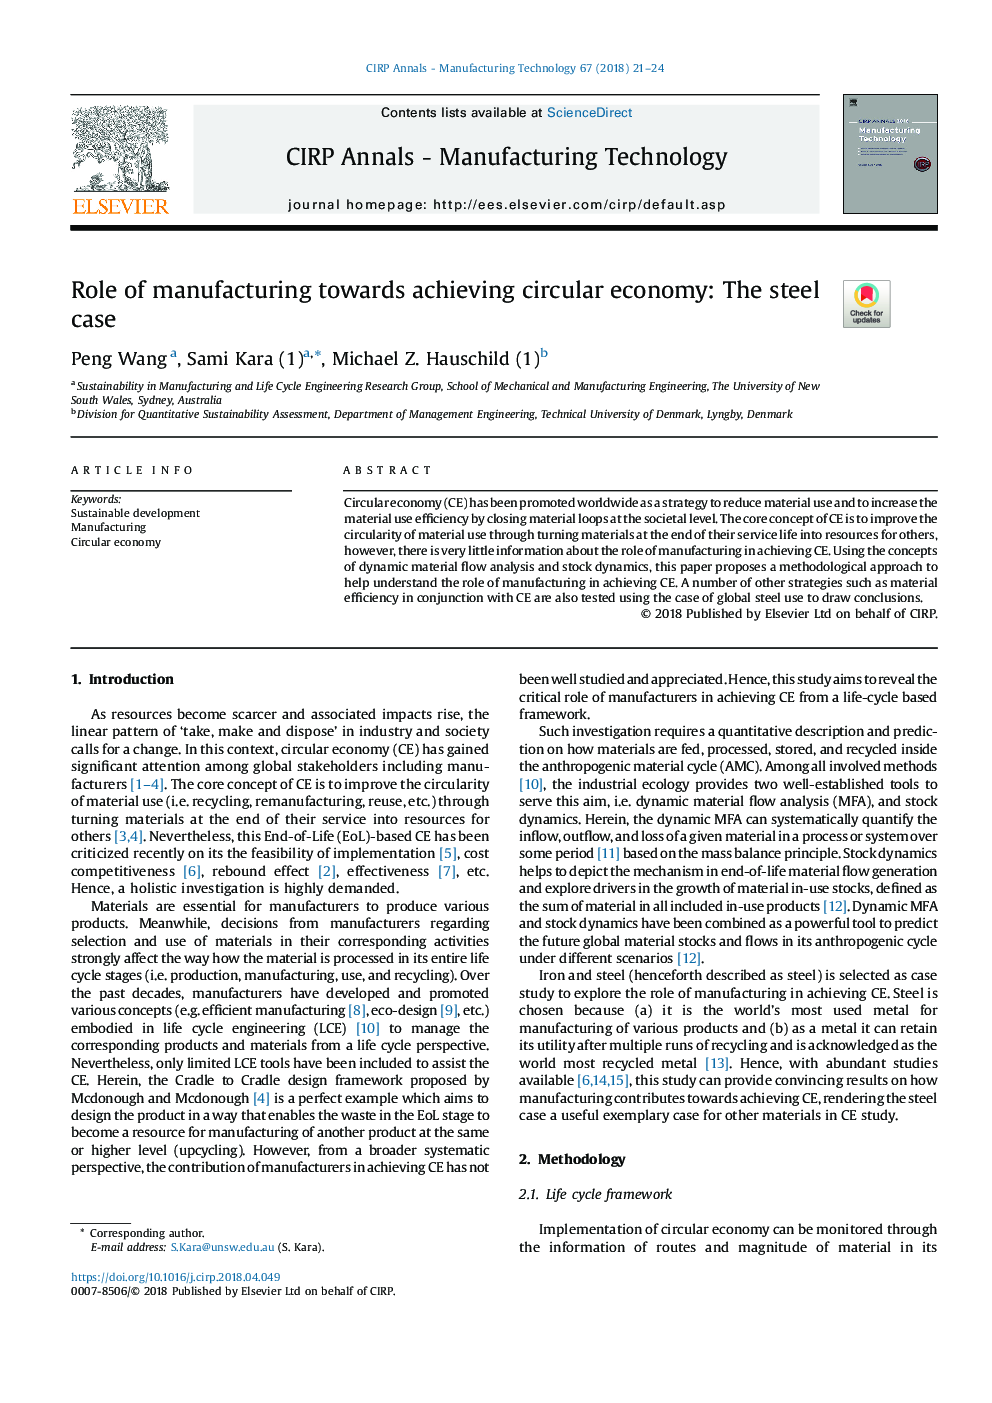 Role of manufacturing towards achieving circular economy: The steel case